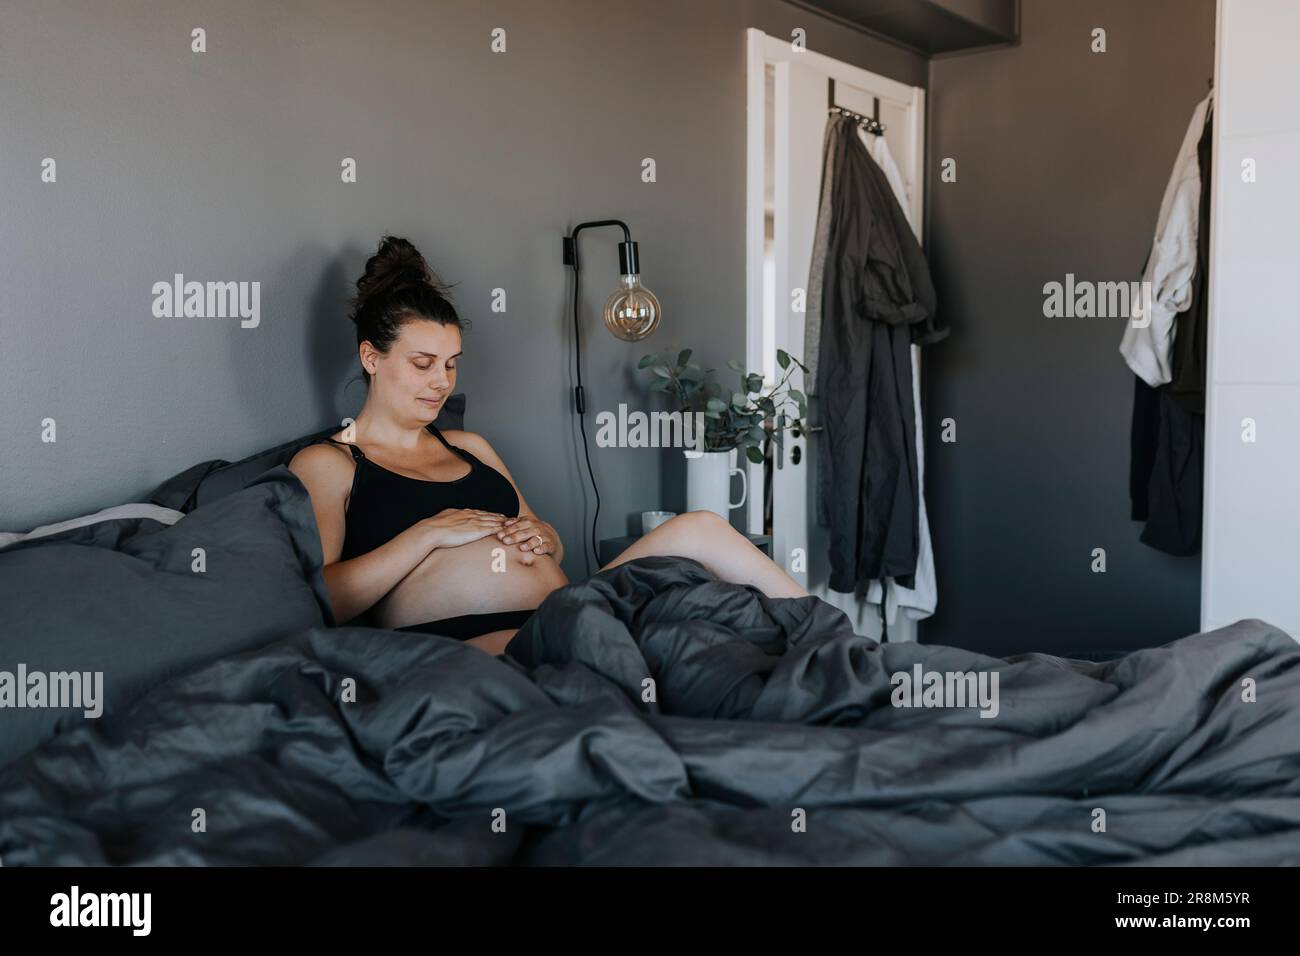 Pregnant woman relaxing in bed and touching belly with care Stock Photo